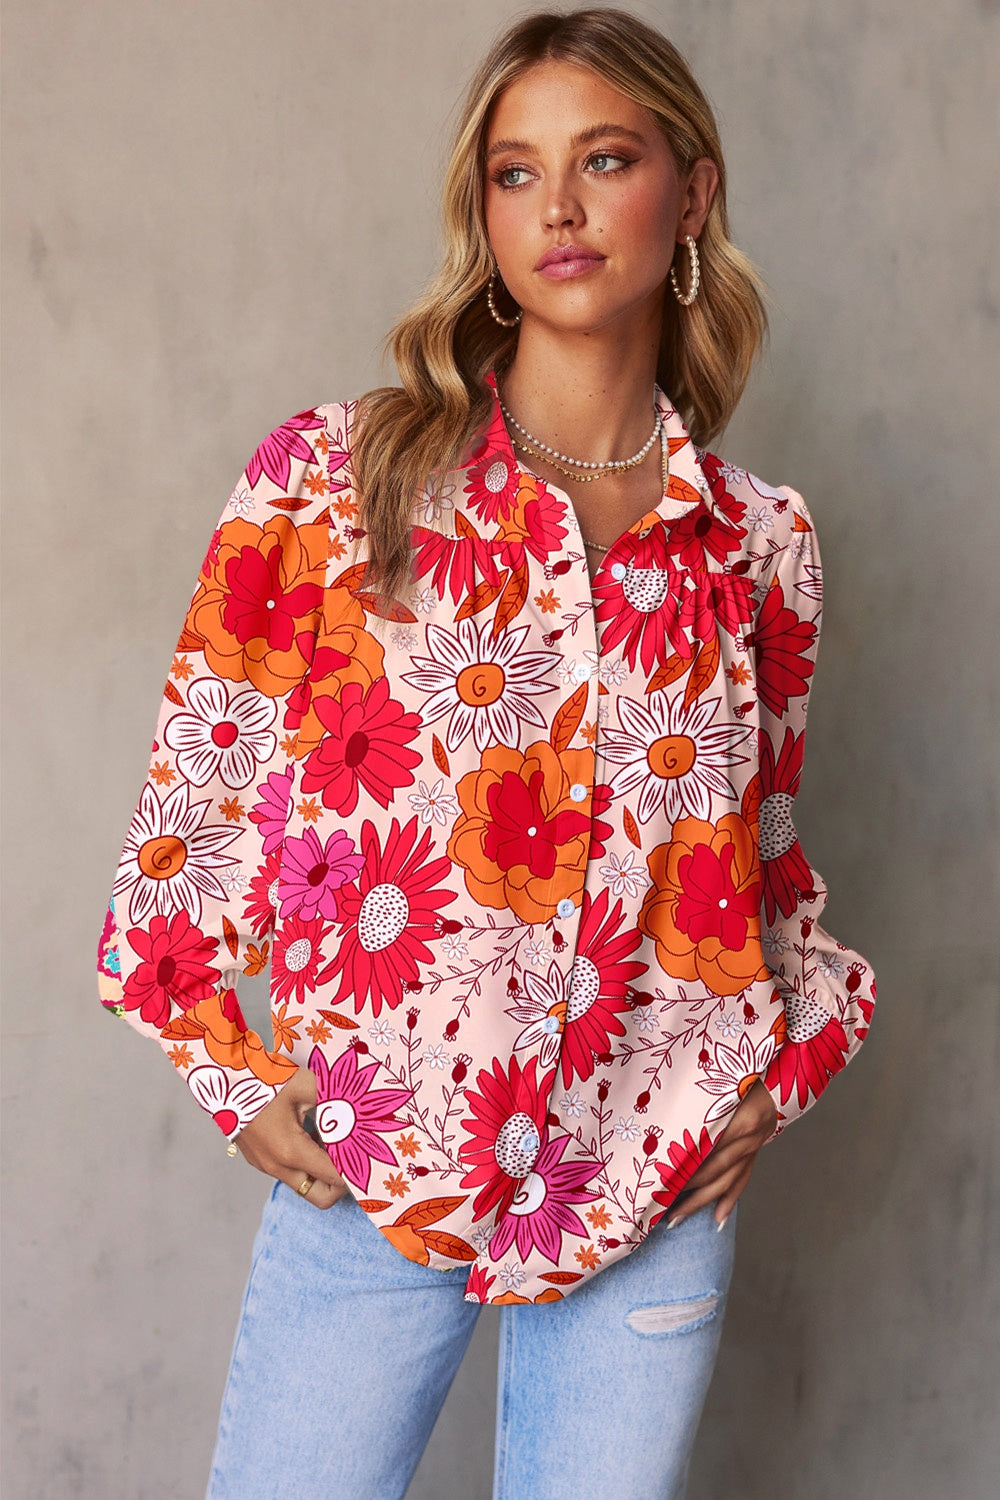 Floral Print Blouse Collared Neck Long Sleeve Shirt